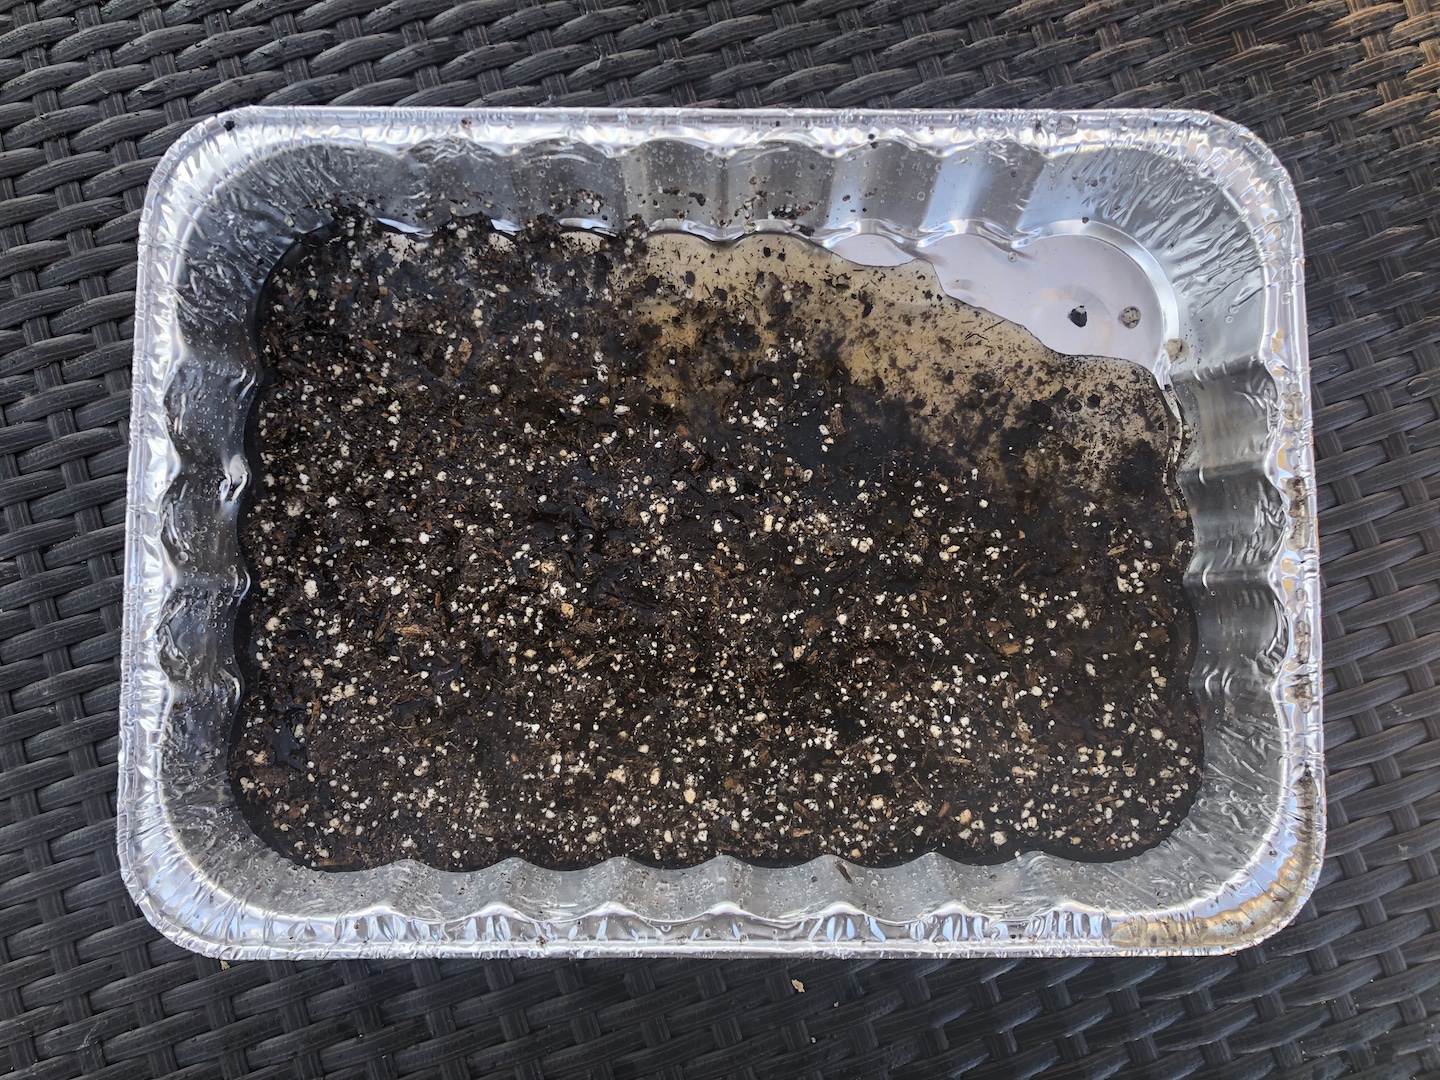 Cake pan filled with soil and water